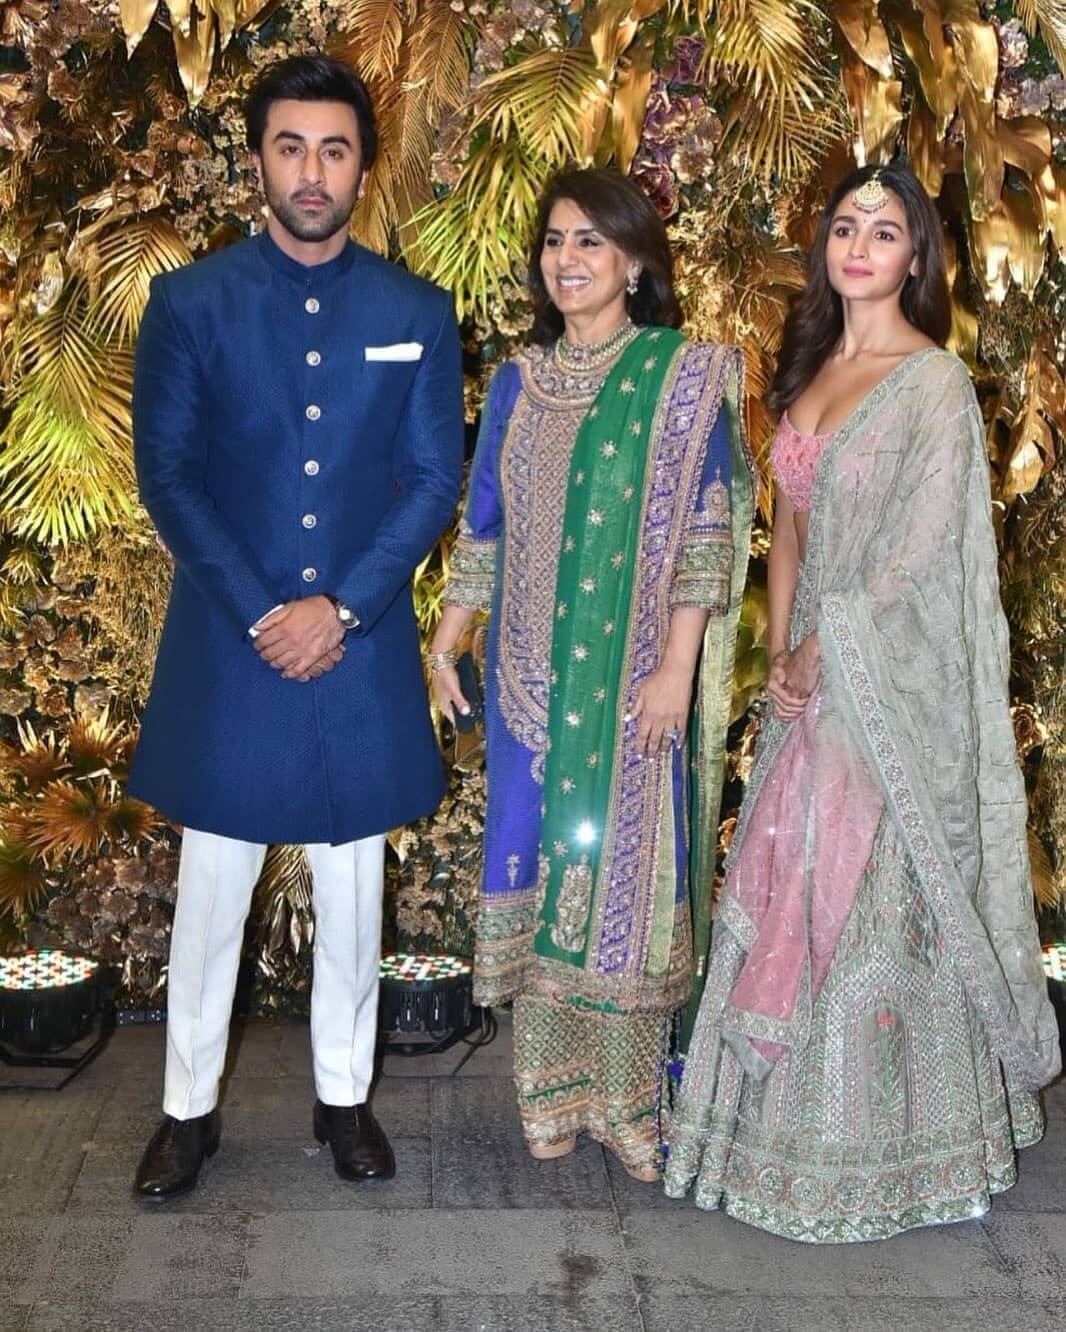 Inside Armaan Jain And Anissa Malhotra S Wedding Reception Their wedding was a grand affair with who's who of the entertainment industry gracing the celebrations. inside armaan jain and anissa malhotra